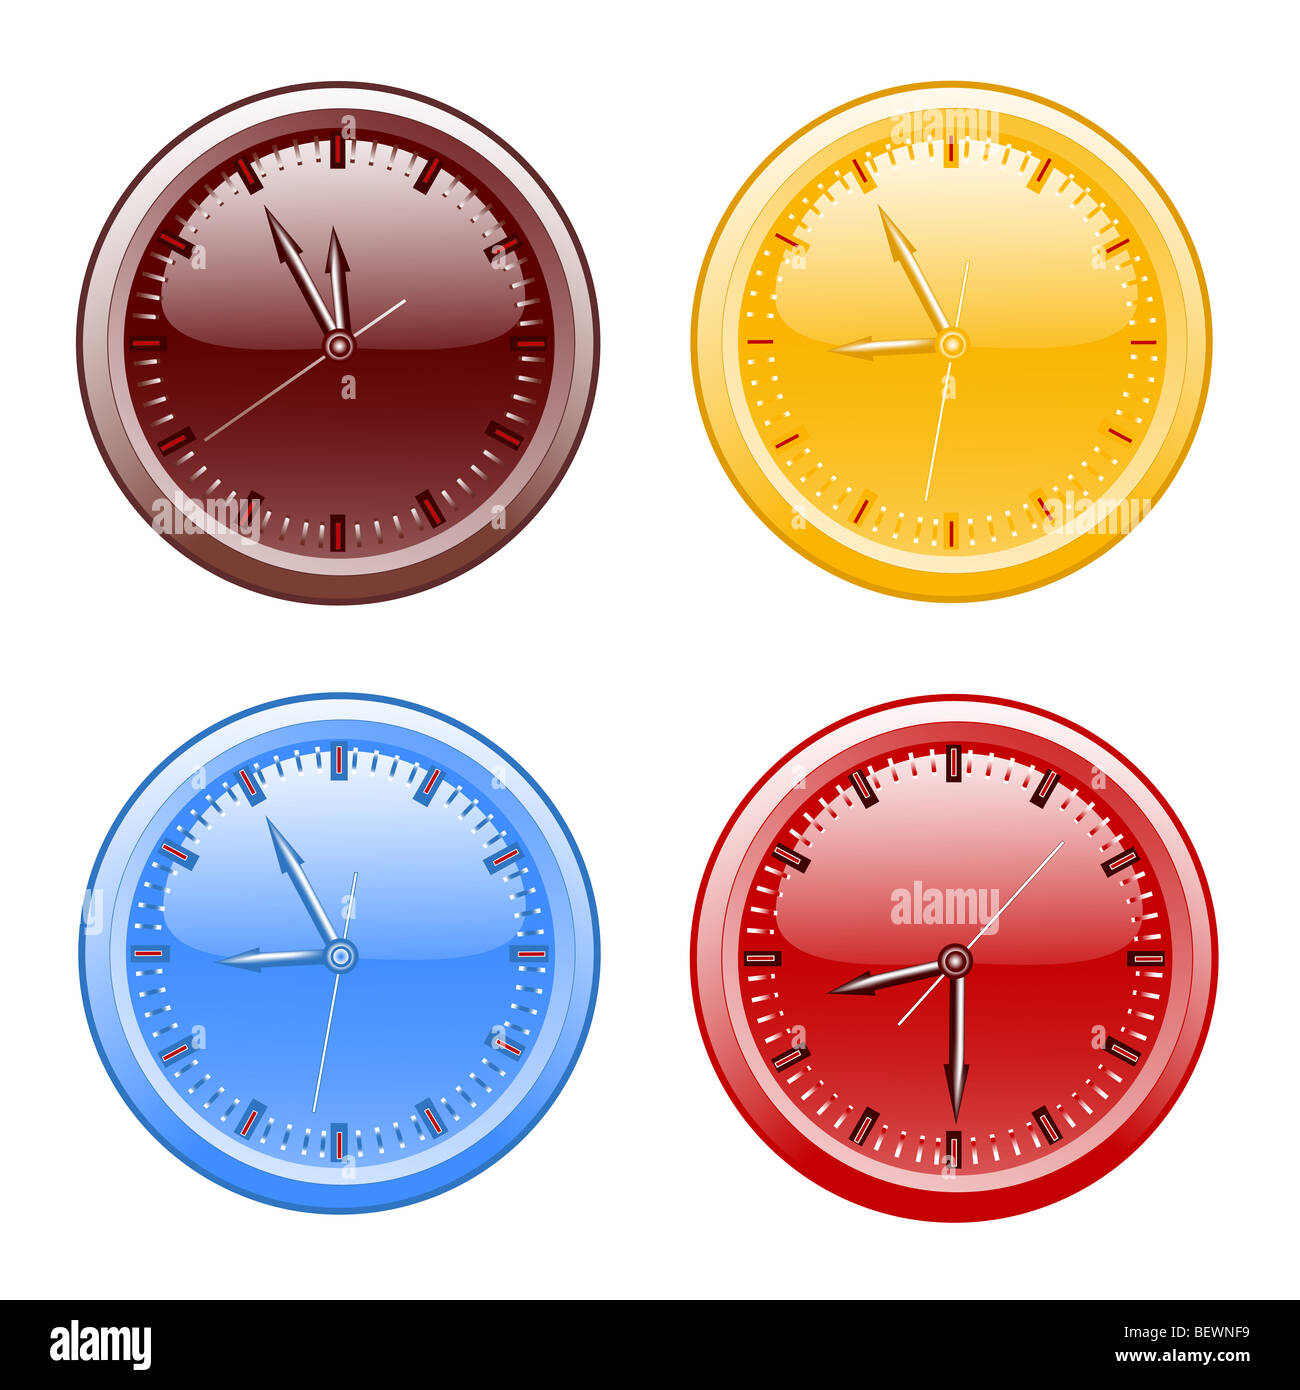 vector illustration of four different clocks on white background. Stock Photo